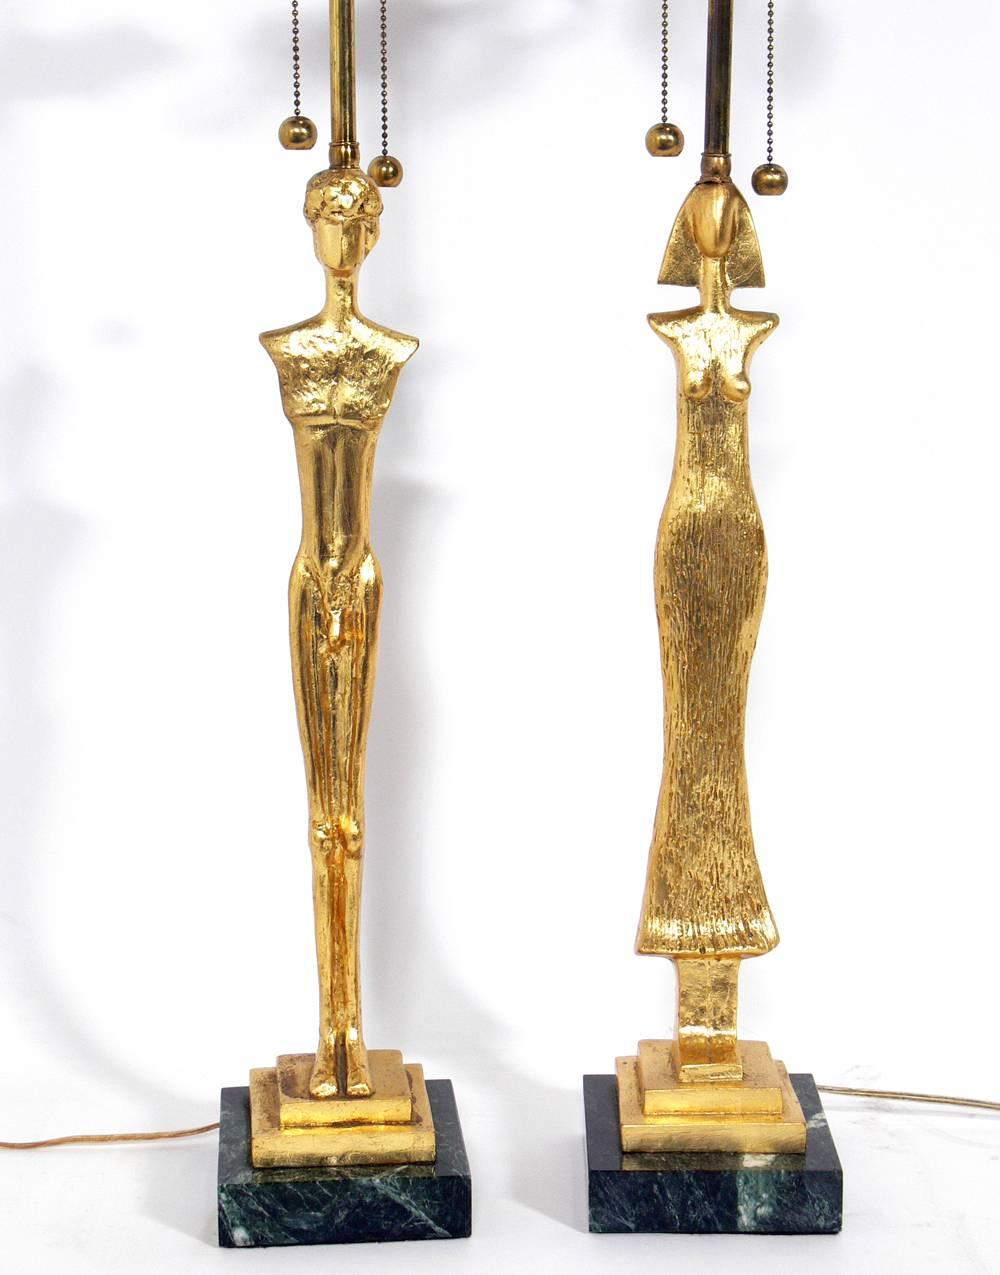 Pair of gilt metal figural lamps in the manner of Diego Giacometti, circa 2000s. The price noted below includes the shades.